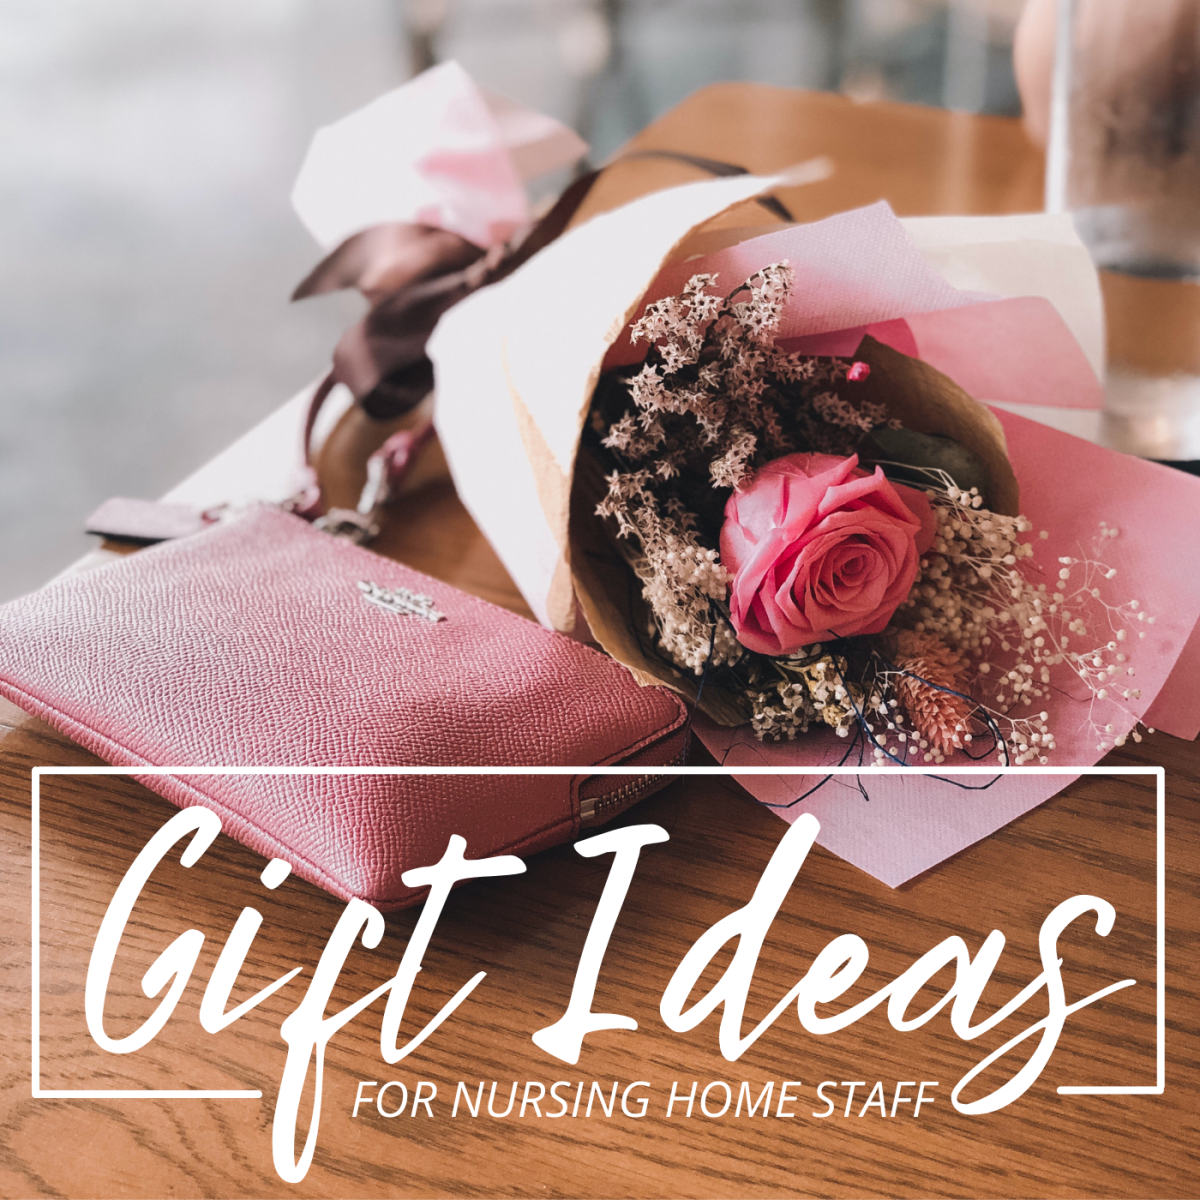 Thoughtful Gifts Ideas for Nursing Home Staff